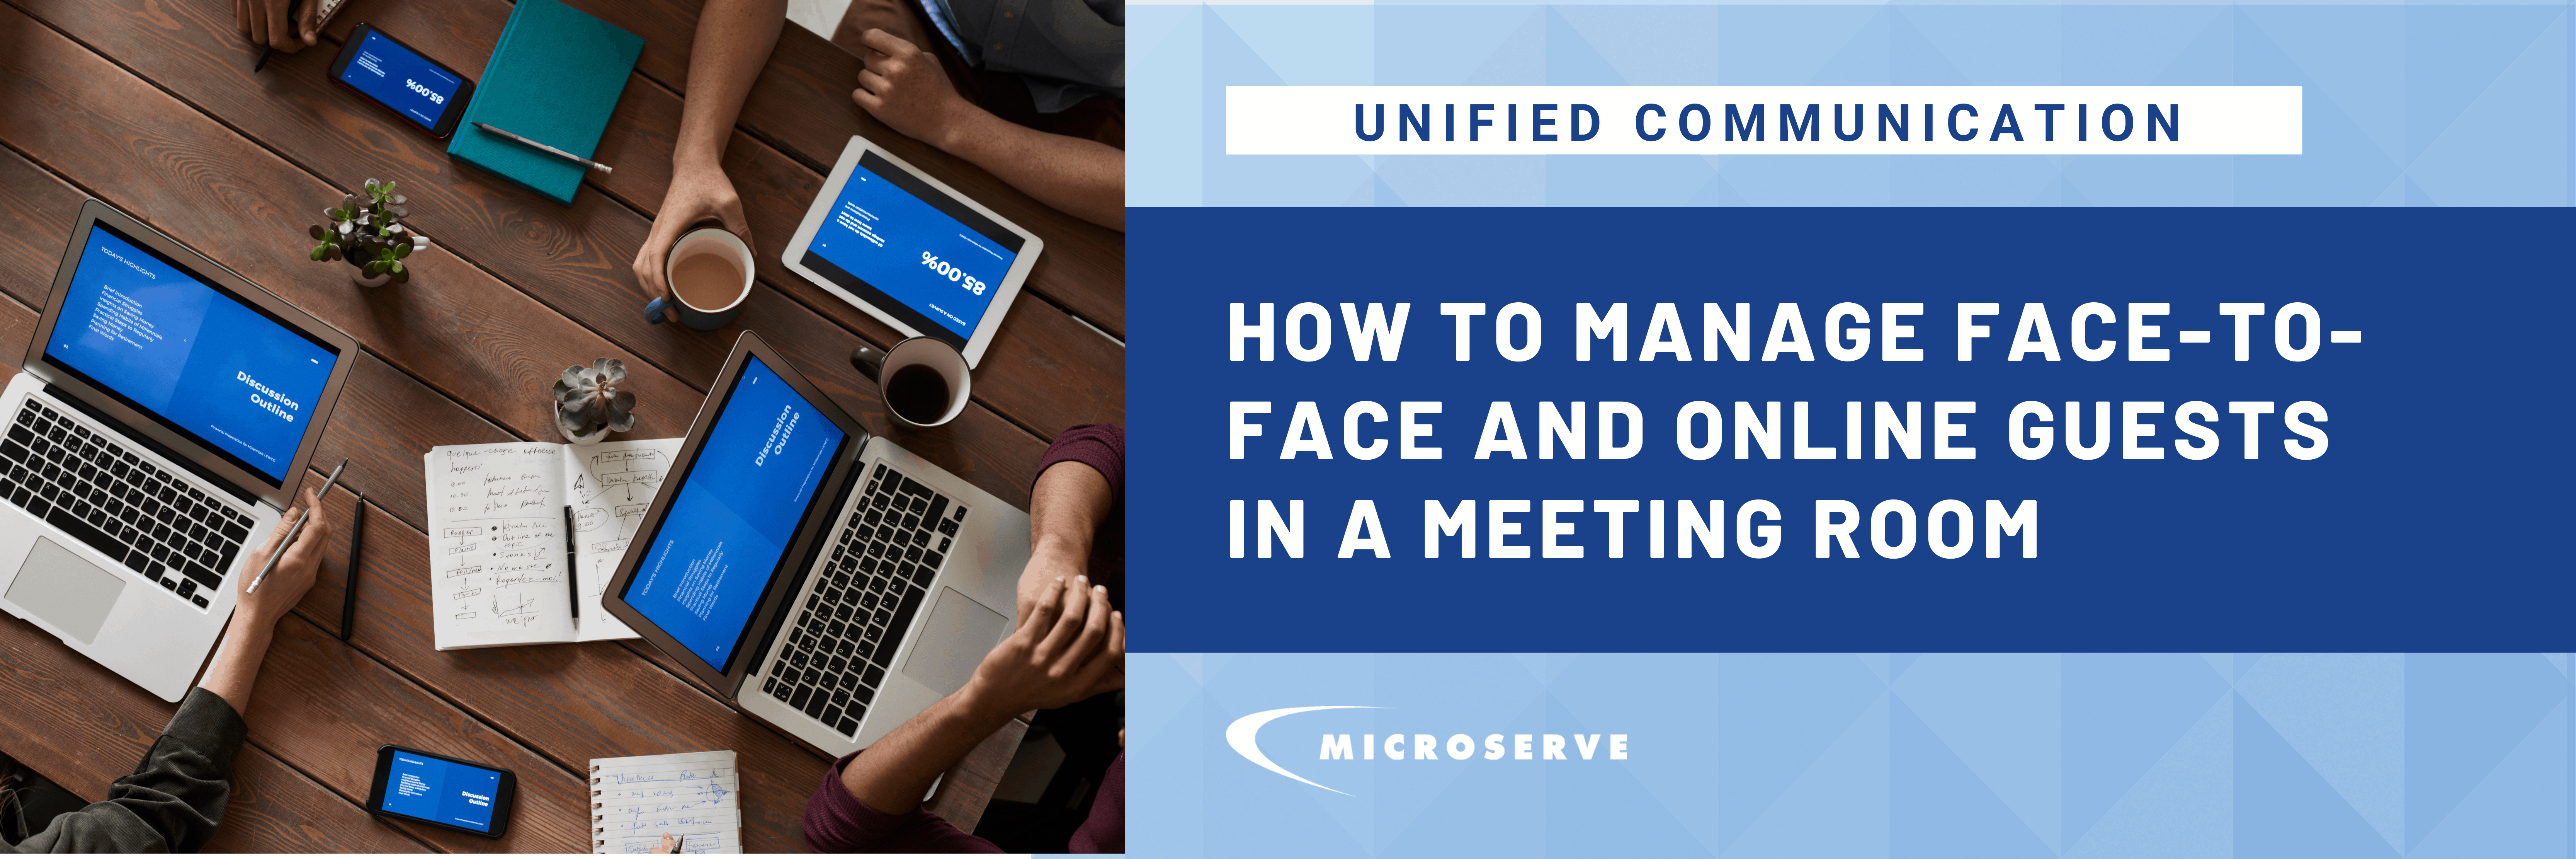 How to Manage Face-to-Face and Online Guests in a Meeting Room